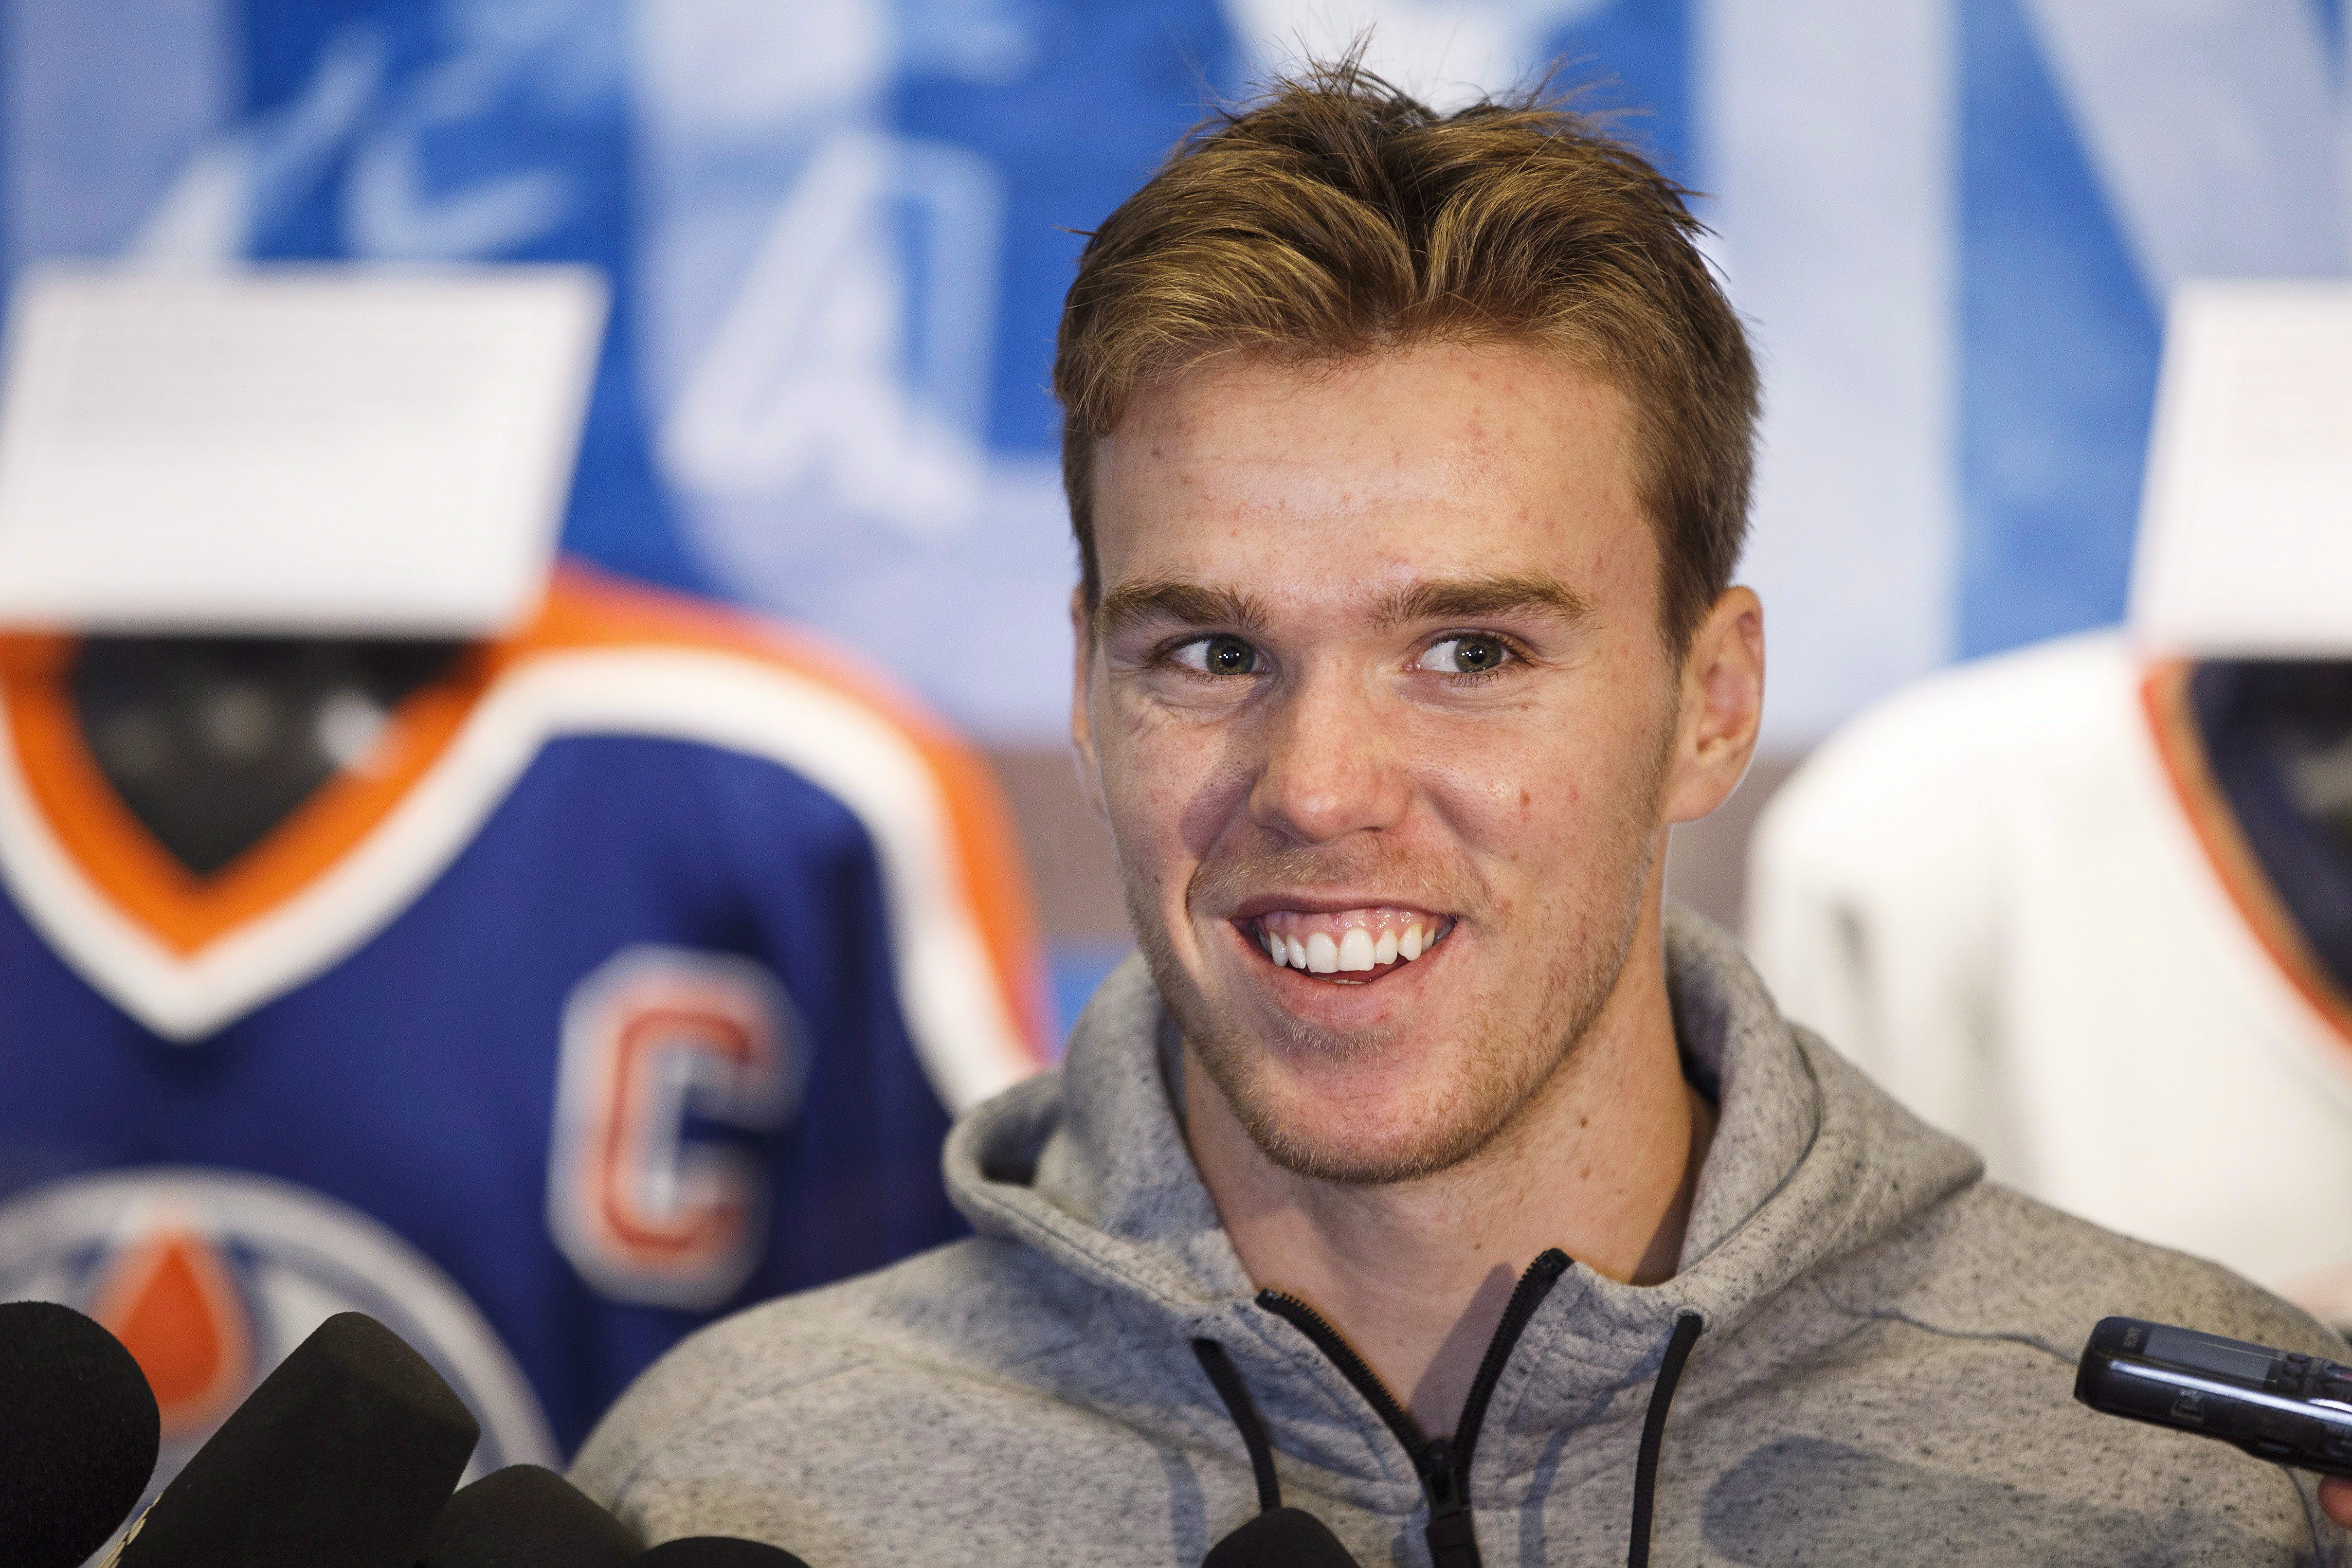 Connor McDavid told he wears wrong skate size by Boston pond rink worker |  Globalnews.ca